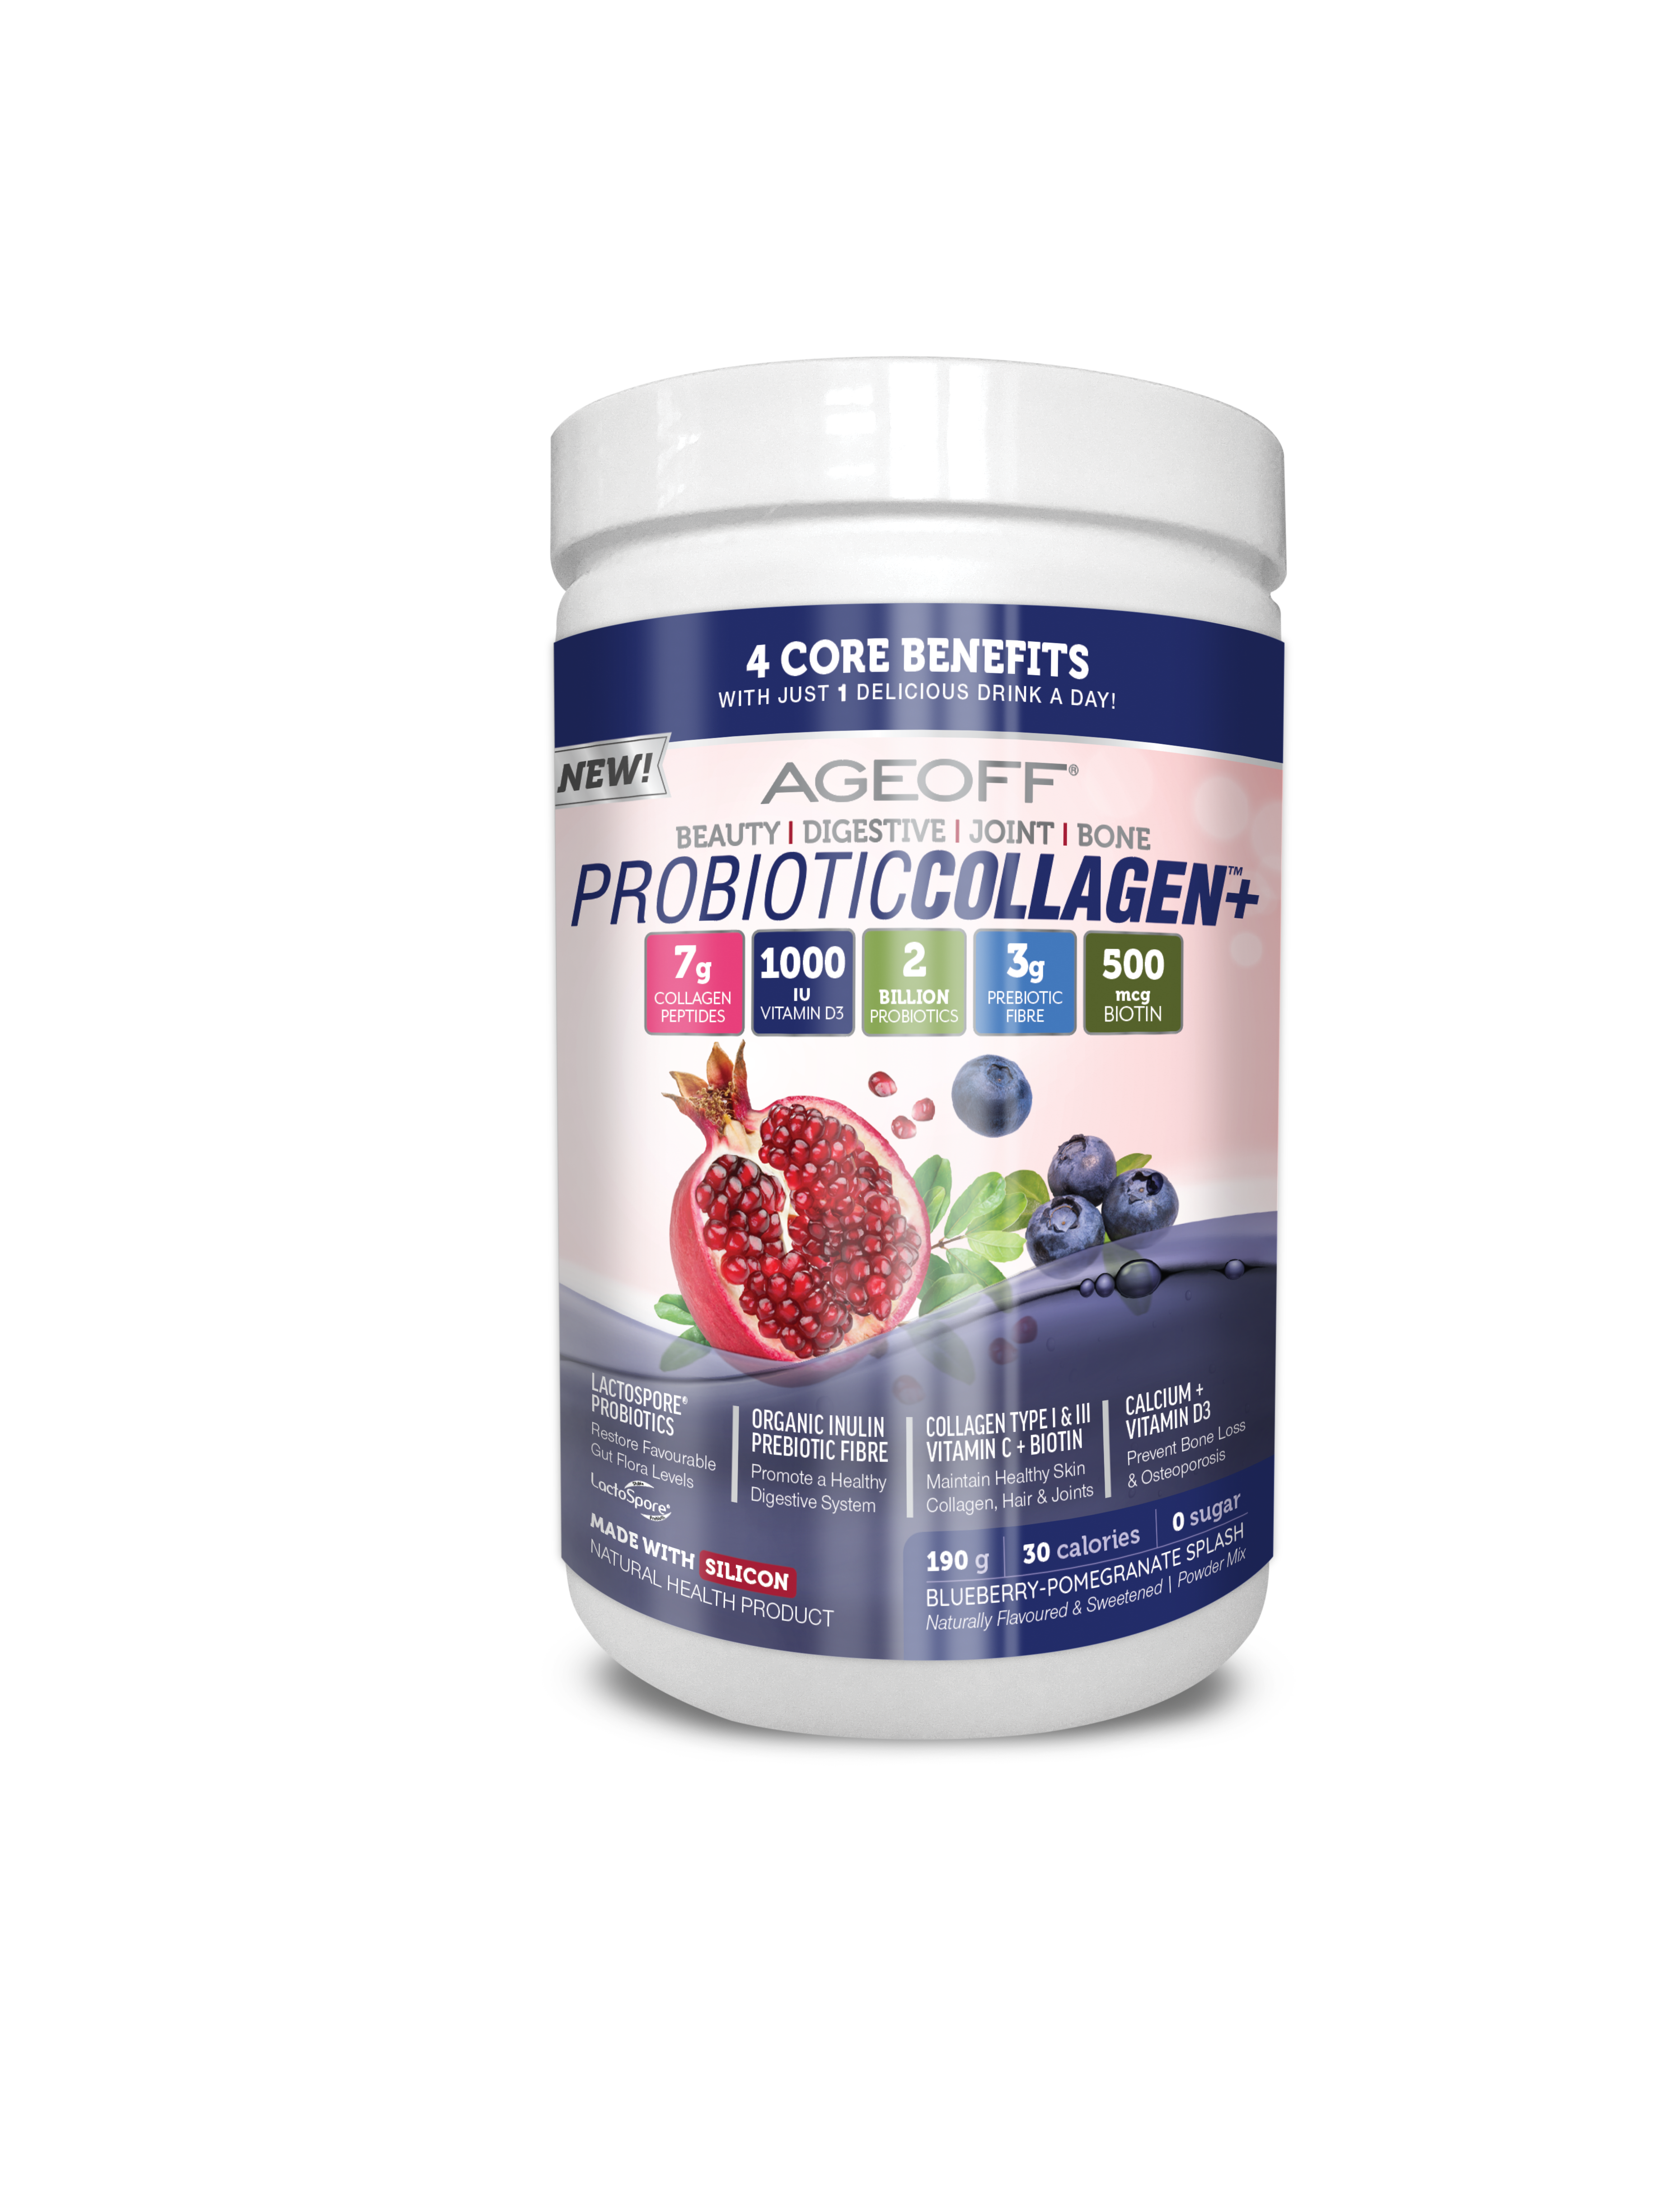 Nuvocare - ProbioticCollagen+ 190 g by Nuvocare - Ebambu.ca natural health product store - free shipping <59$ 